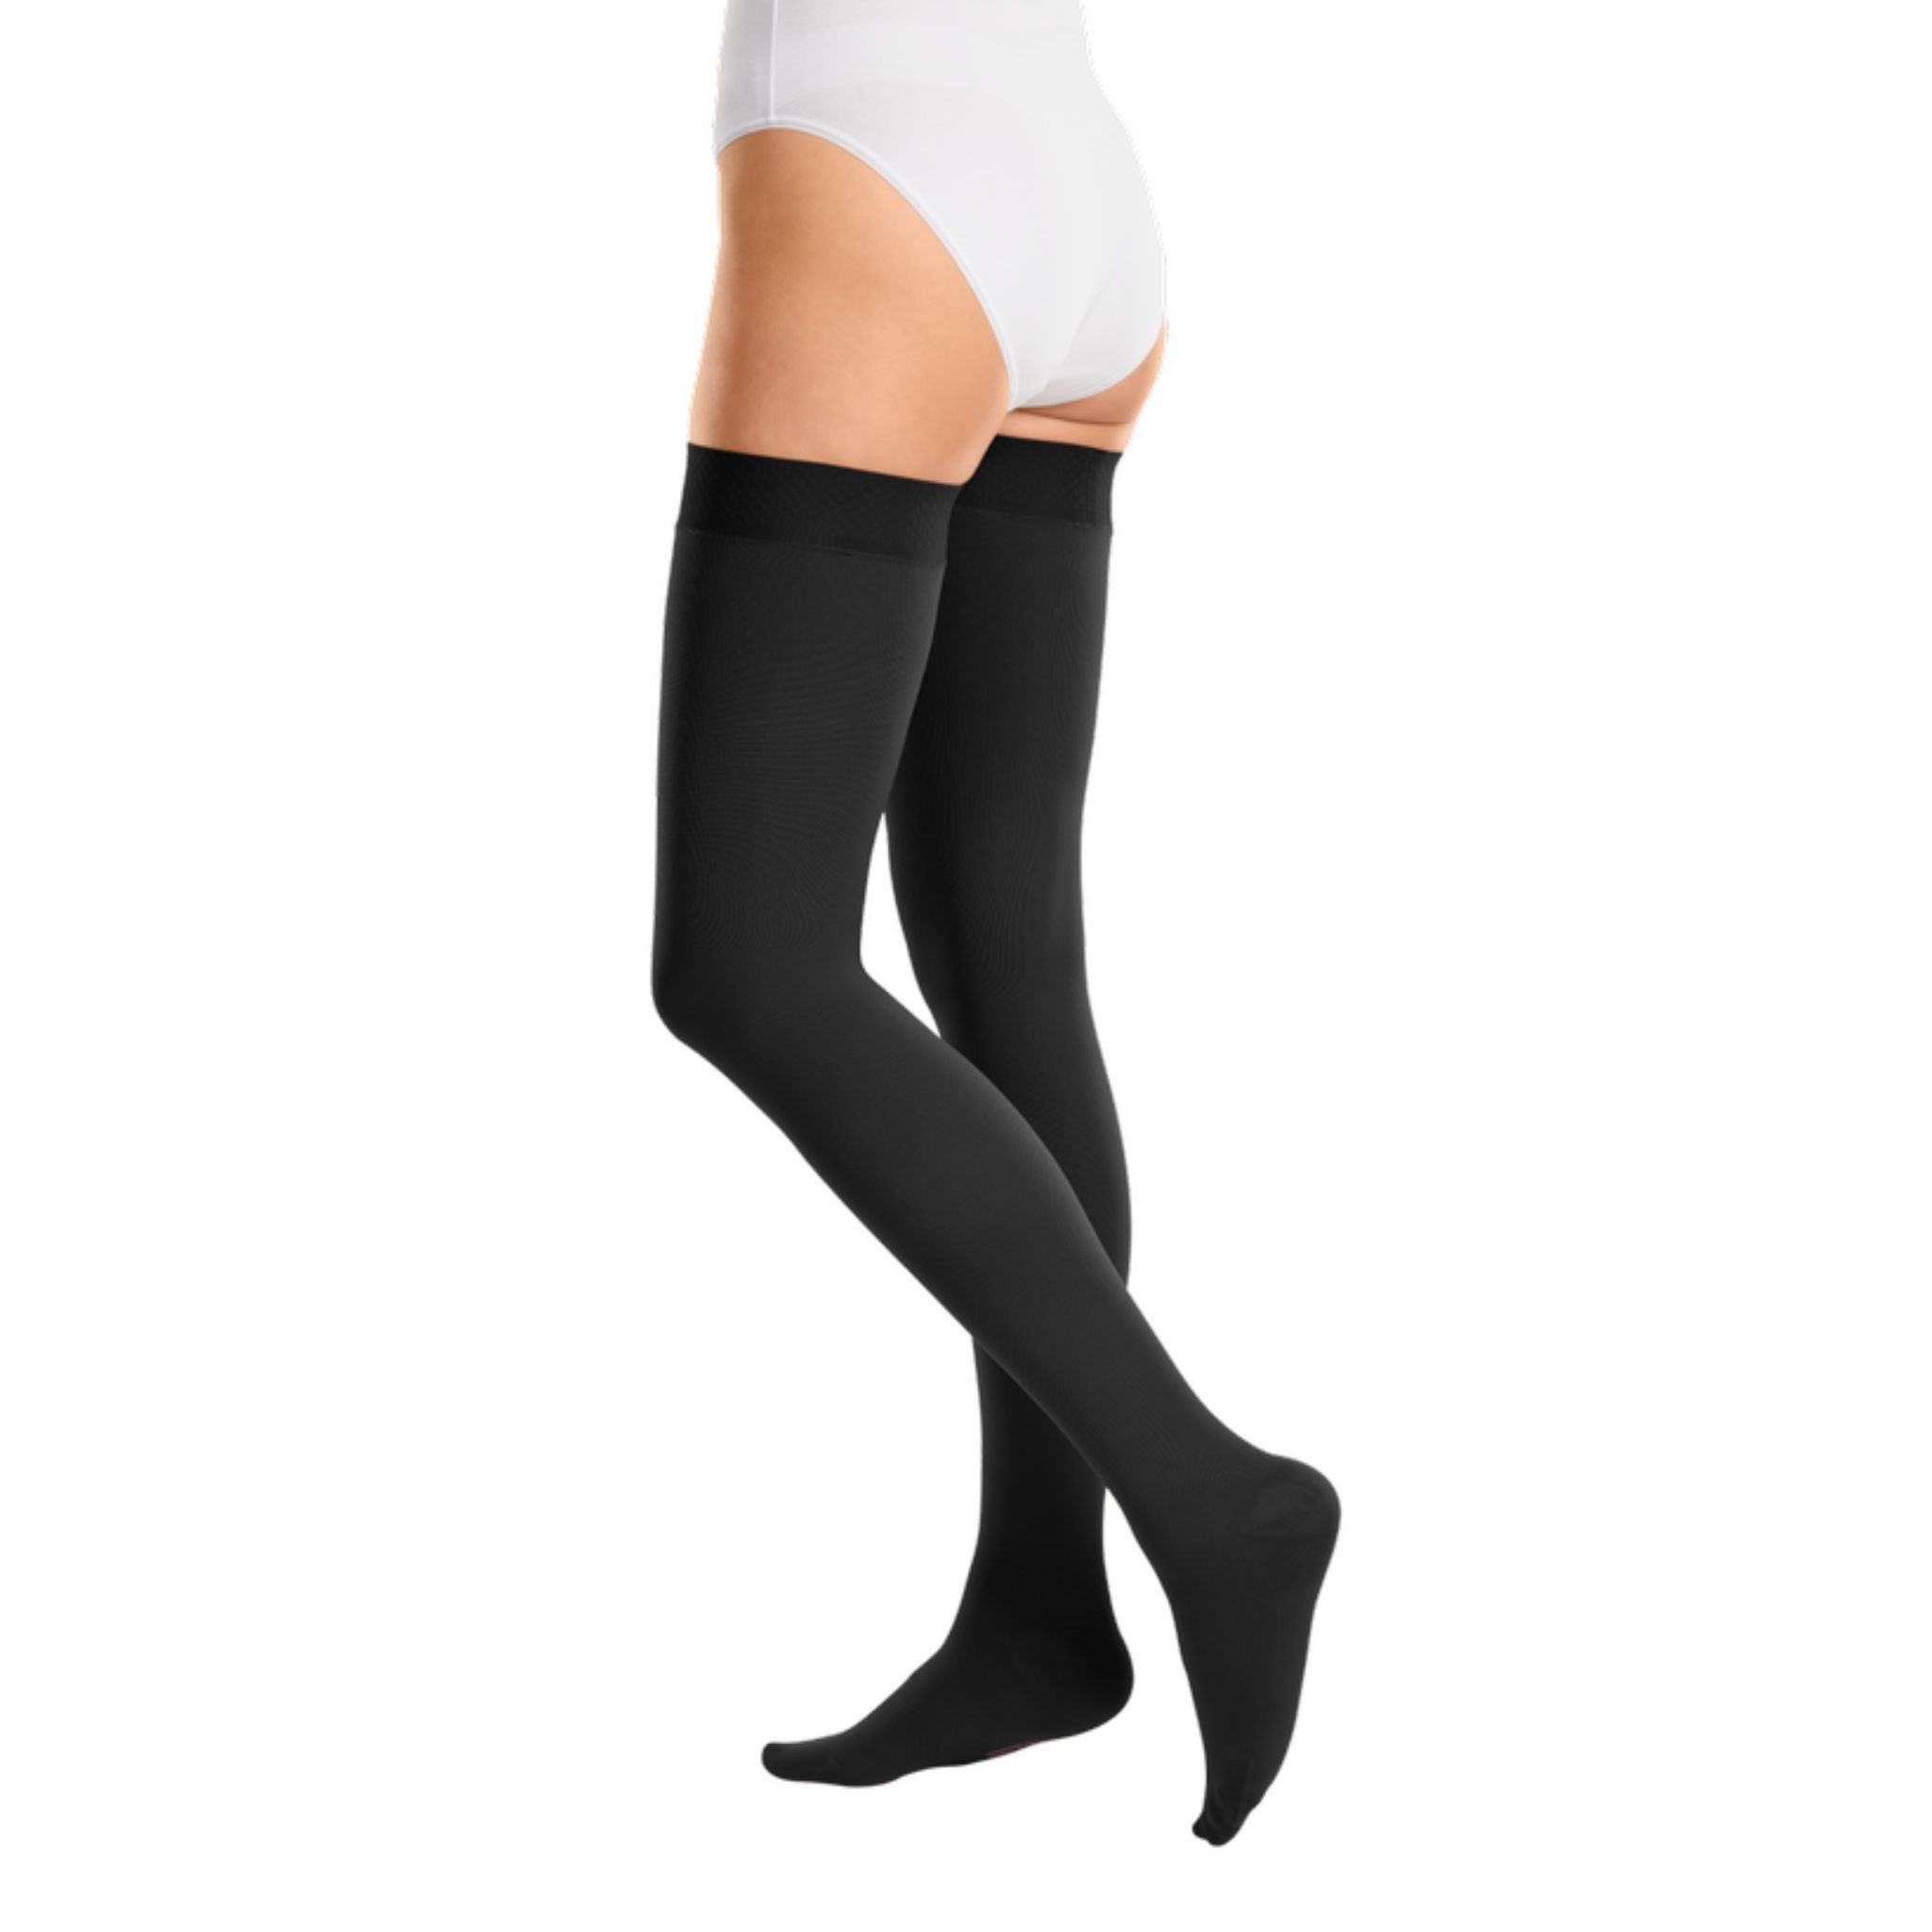 Compression Stockings | Thigh High | Closed Toe | Silicone Topband | Black | mediven cotton